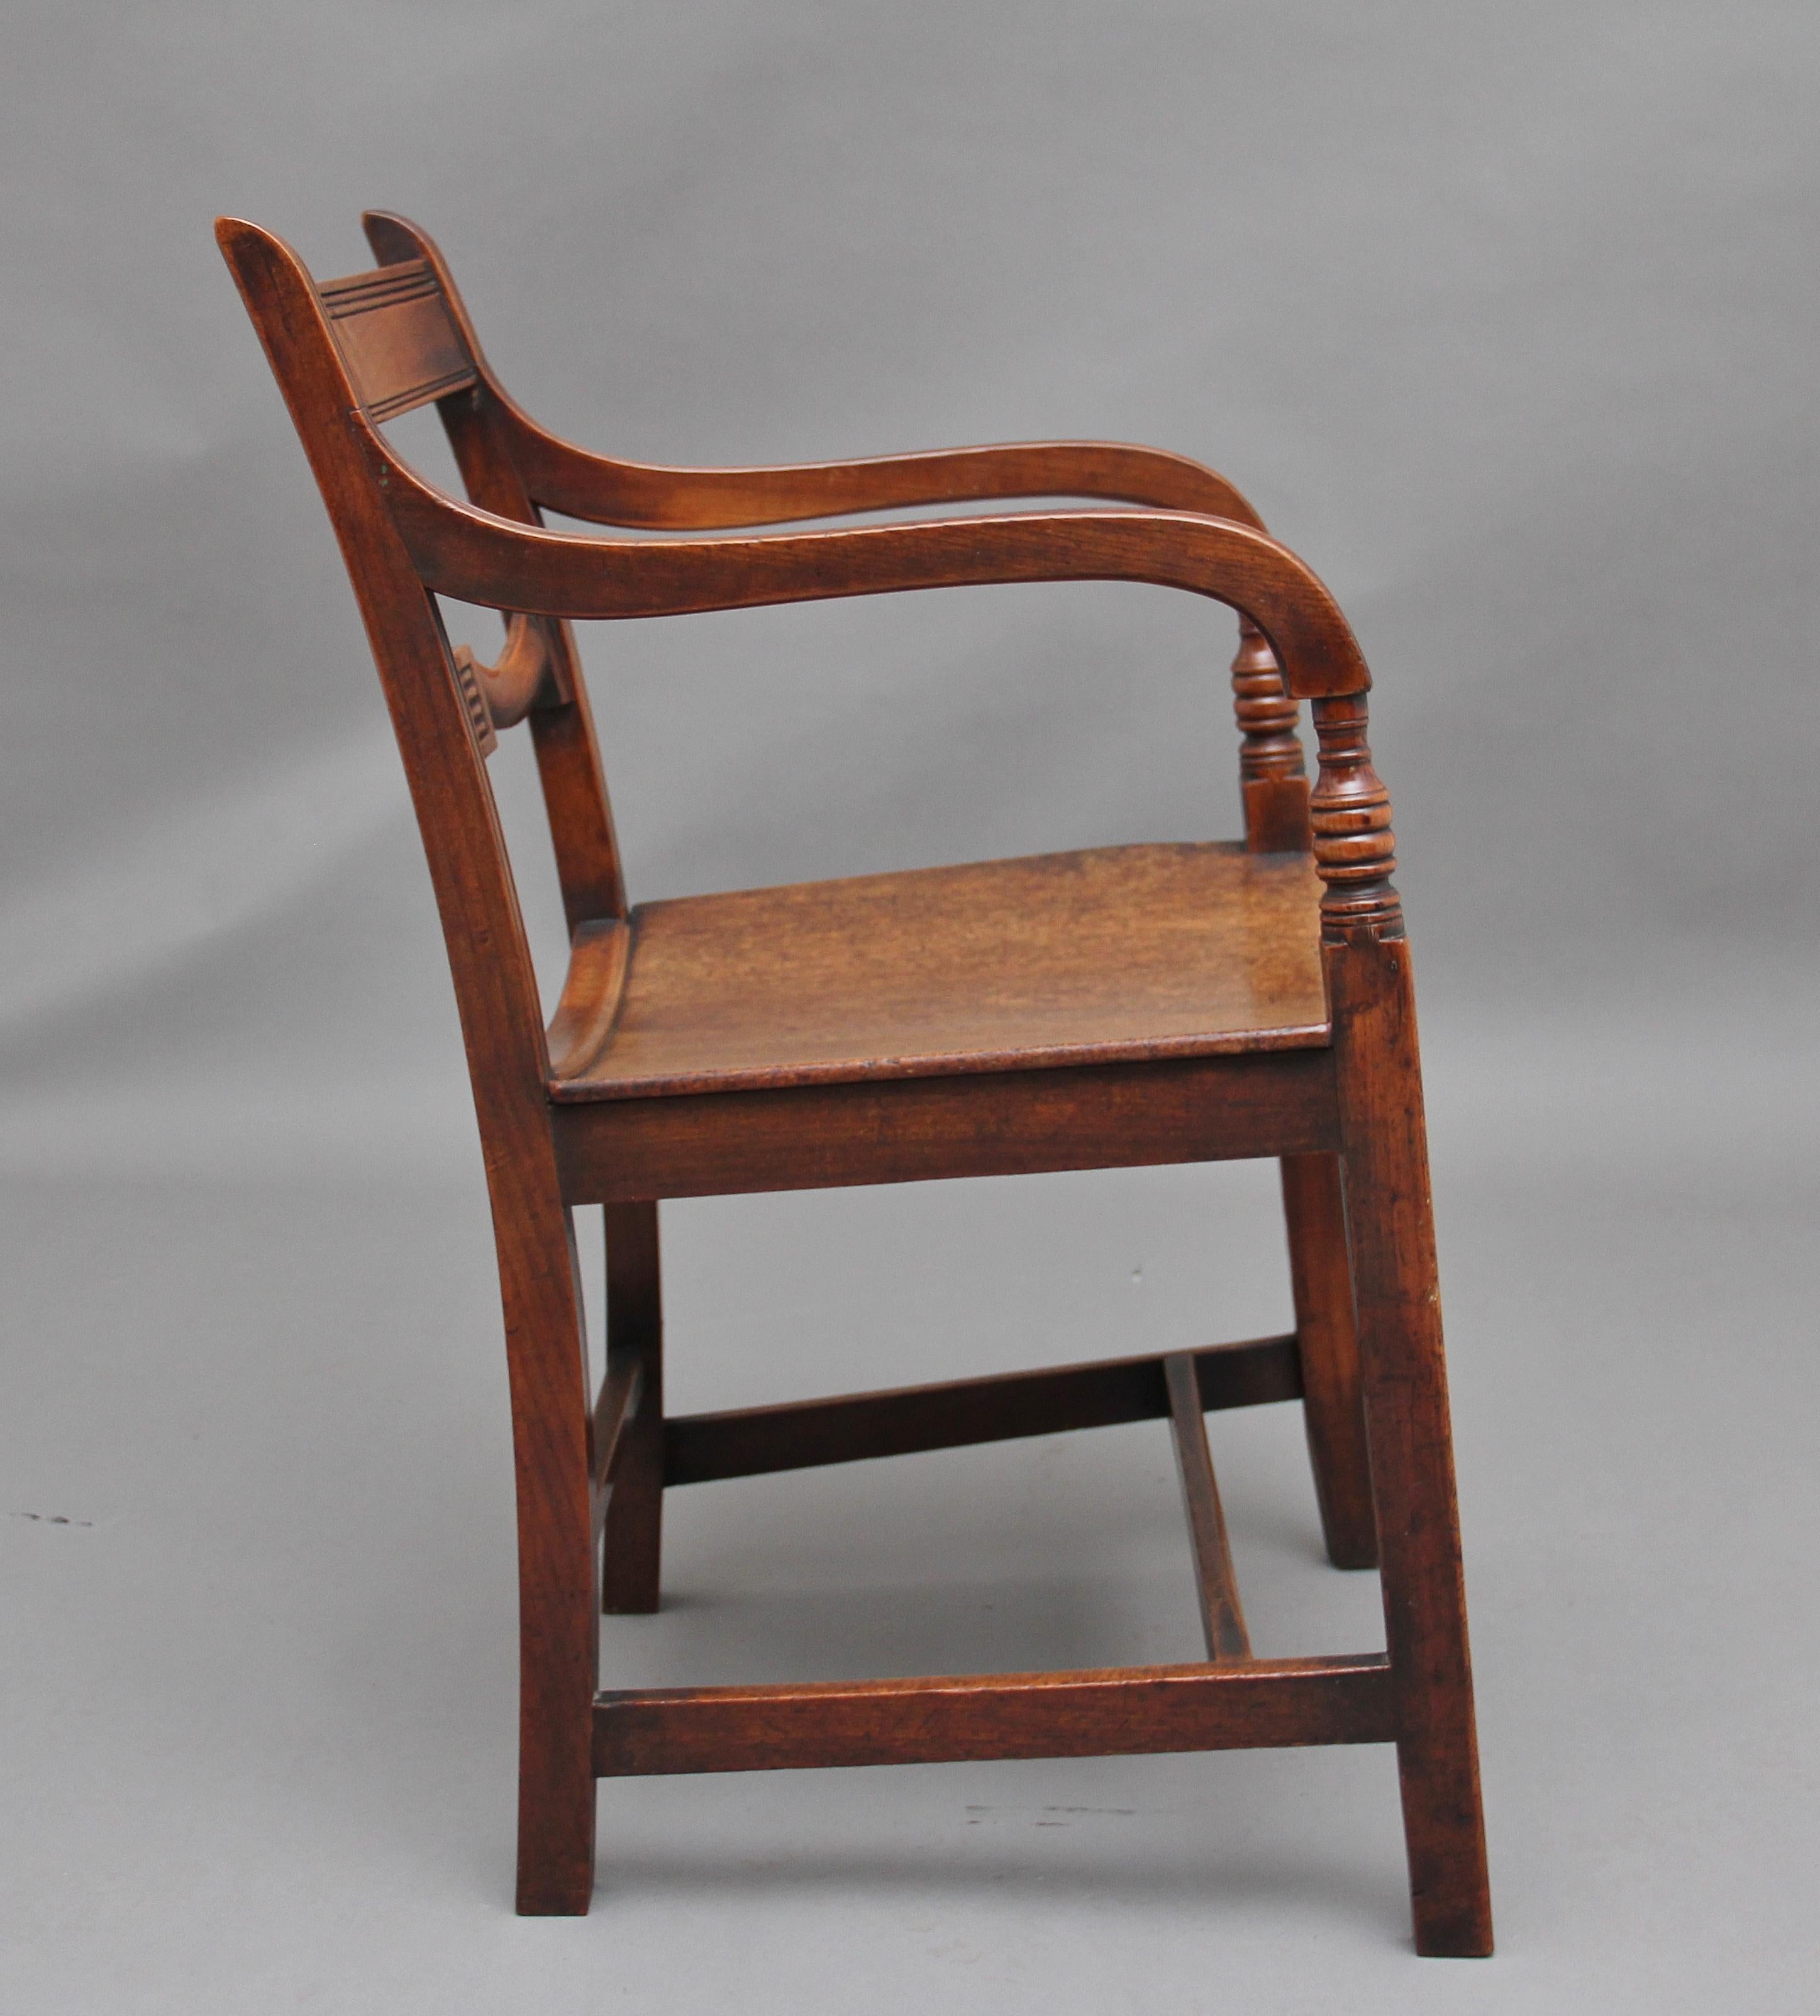 Early 19th century ash and elm armchair, having a reeded top rail and shaped central rail, wonderfully shaped arms with turned supports, curved hard wood seat, supported on square legs united by side, back and front stretchers, circa 1830.